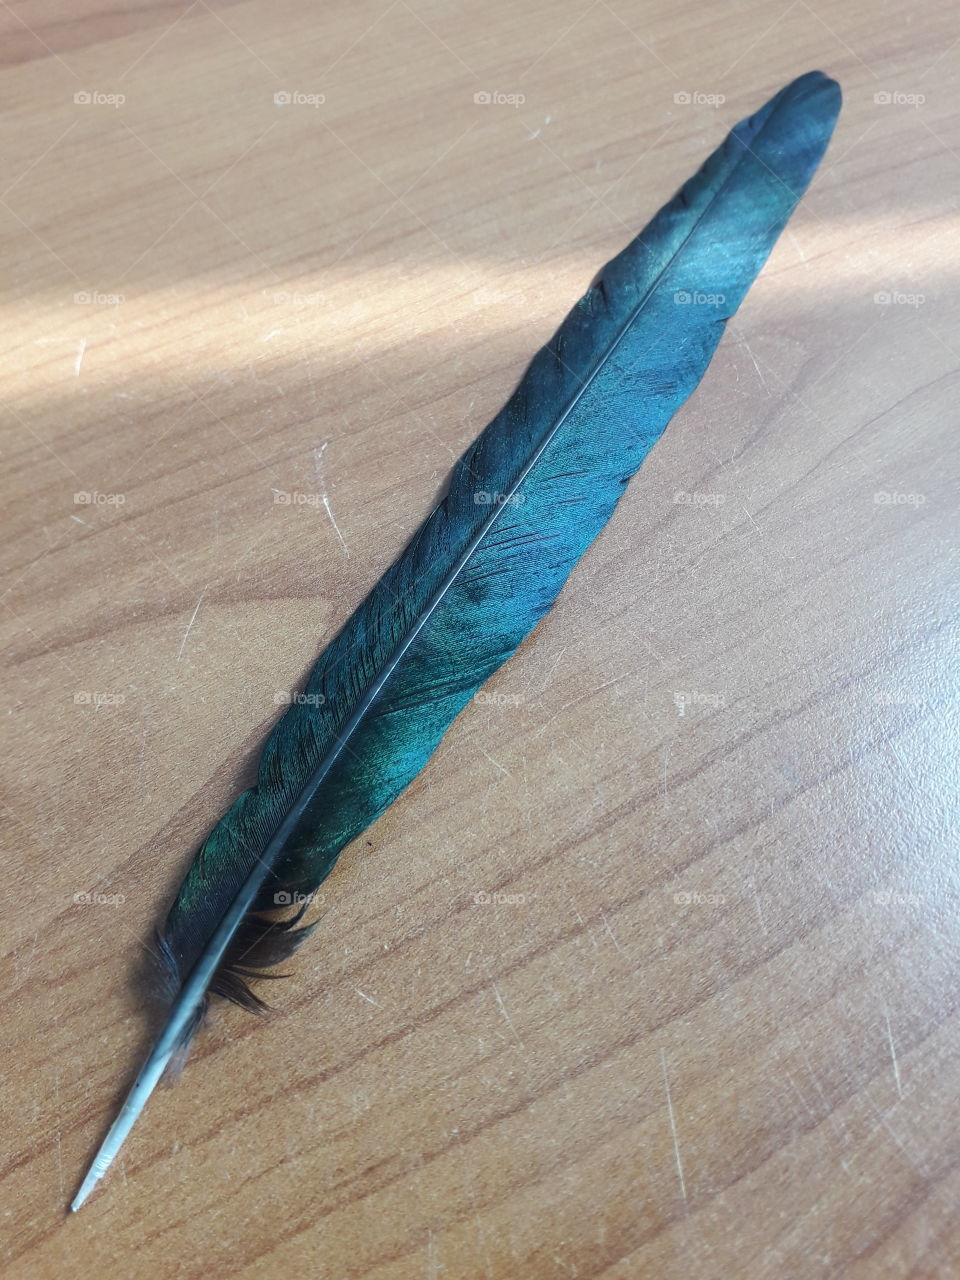 Feather of magpie